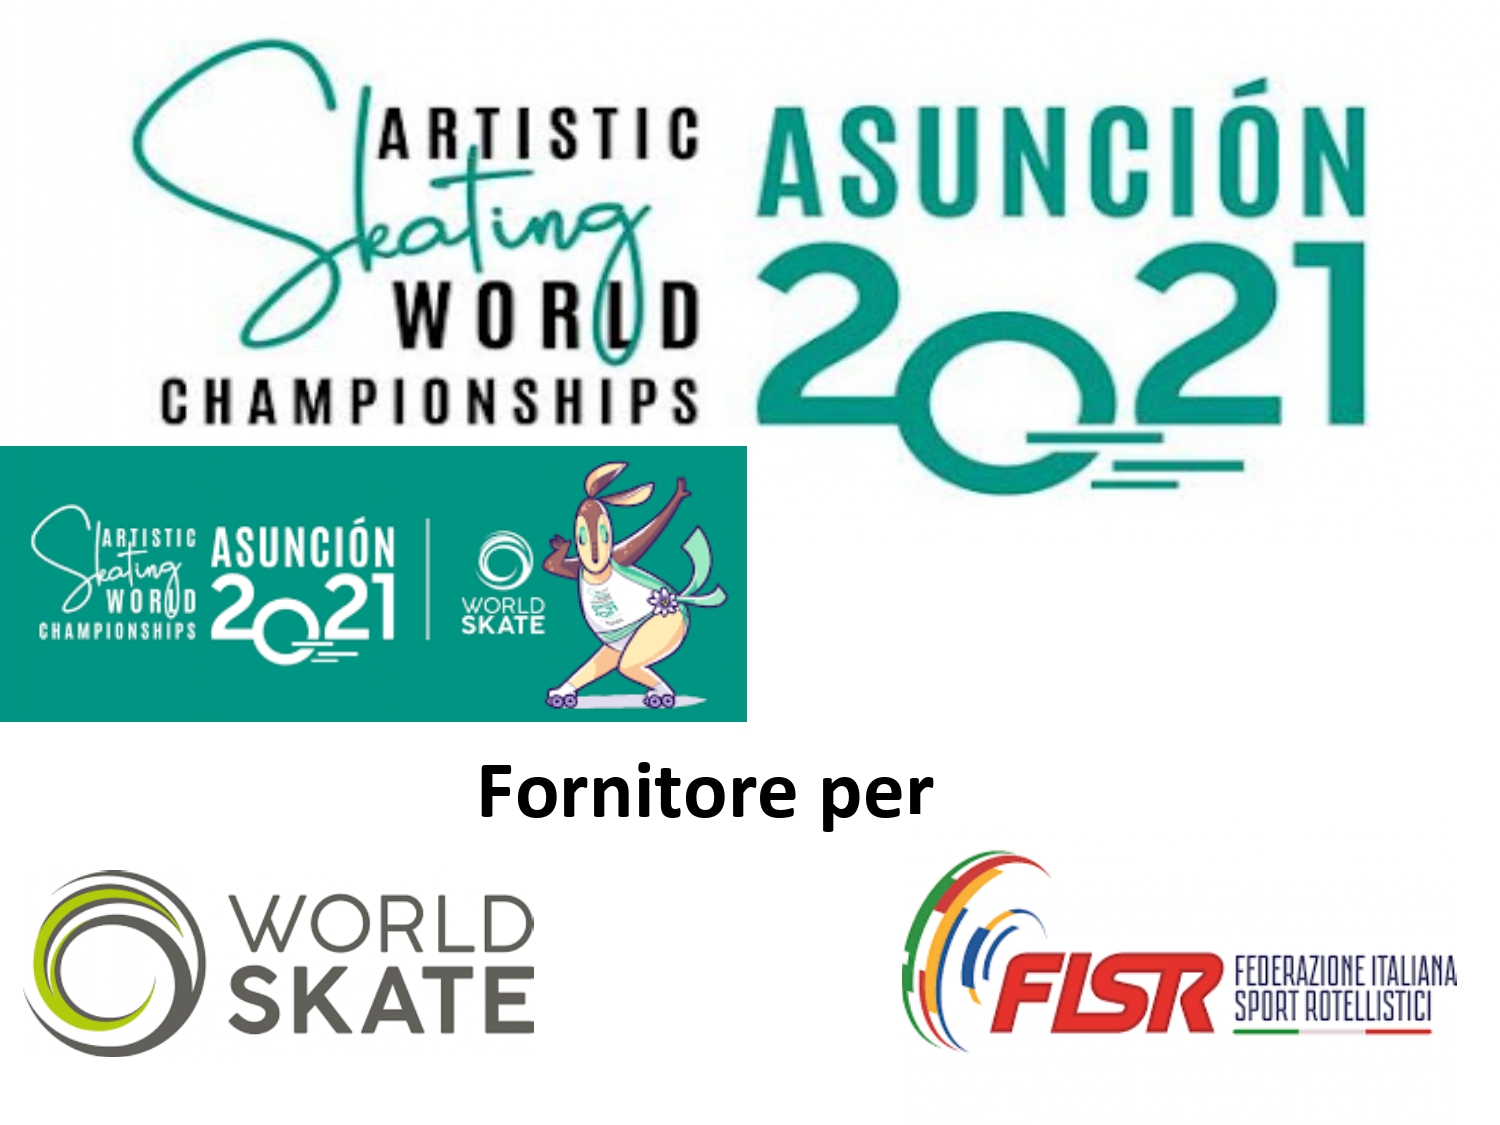 You are currently viewing Artistic Skating World Championships